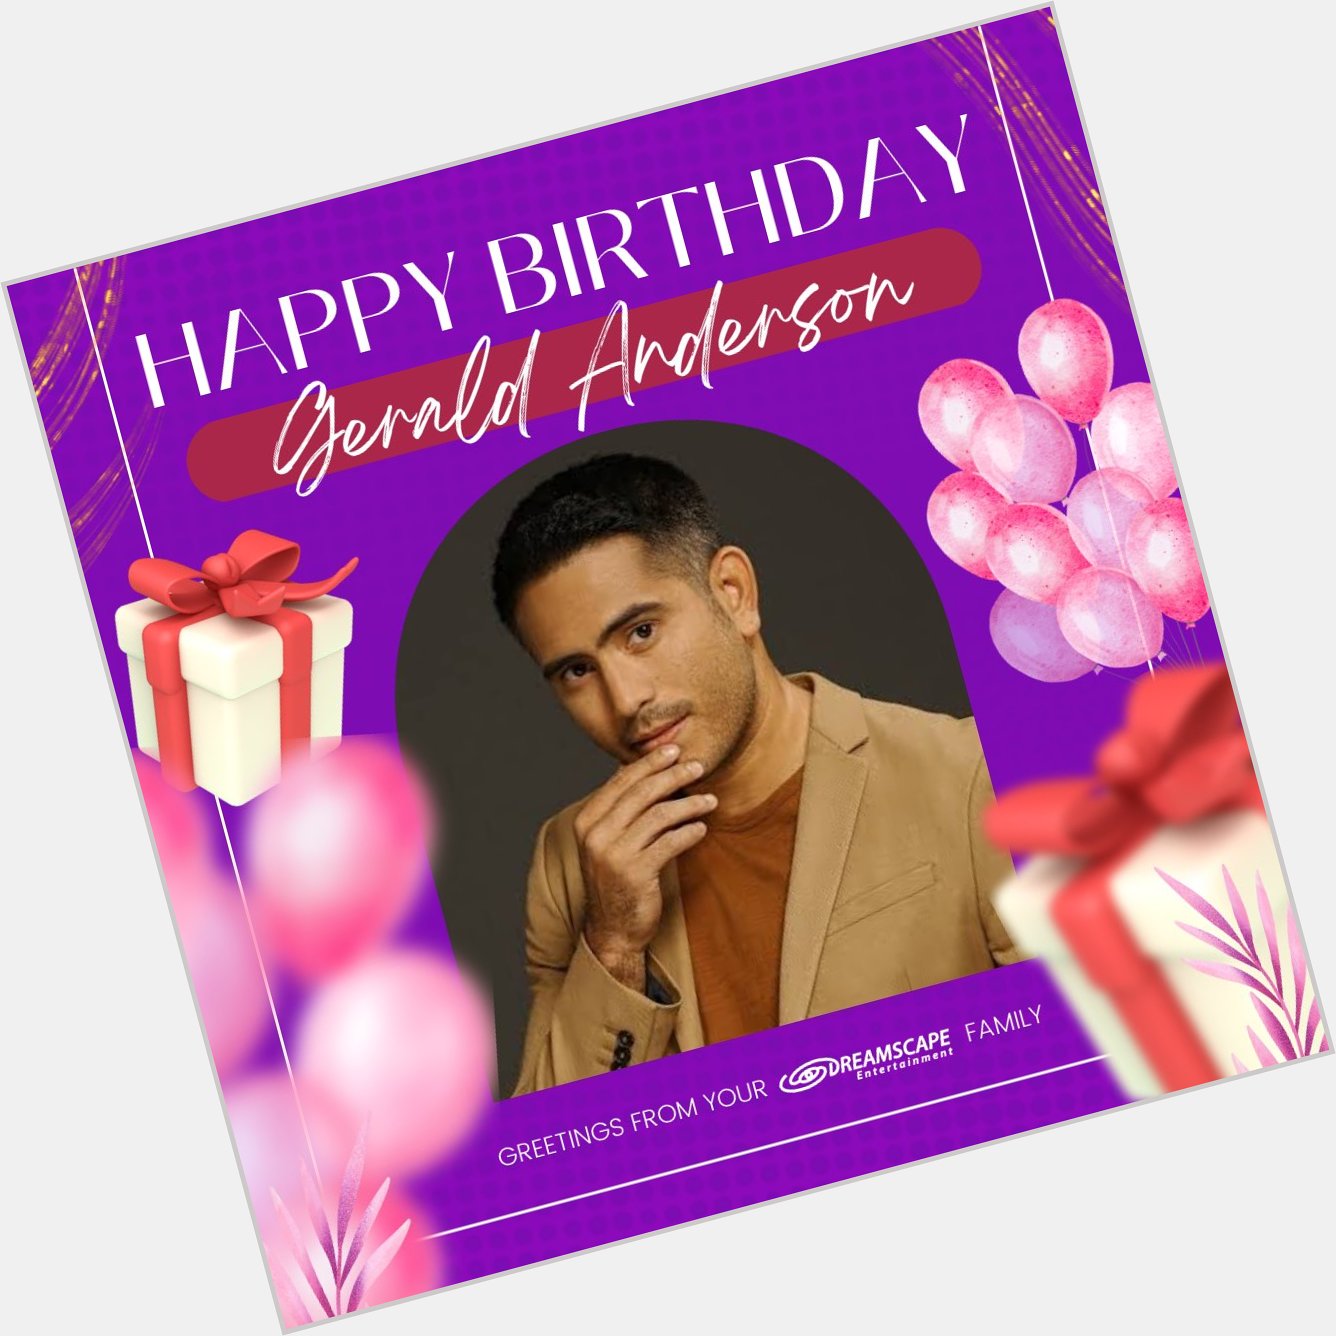 Happy Birthday Gerald Anderson!  Greetings from your Dreamscape family 